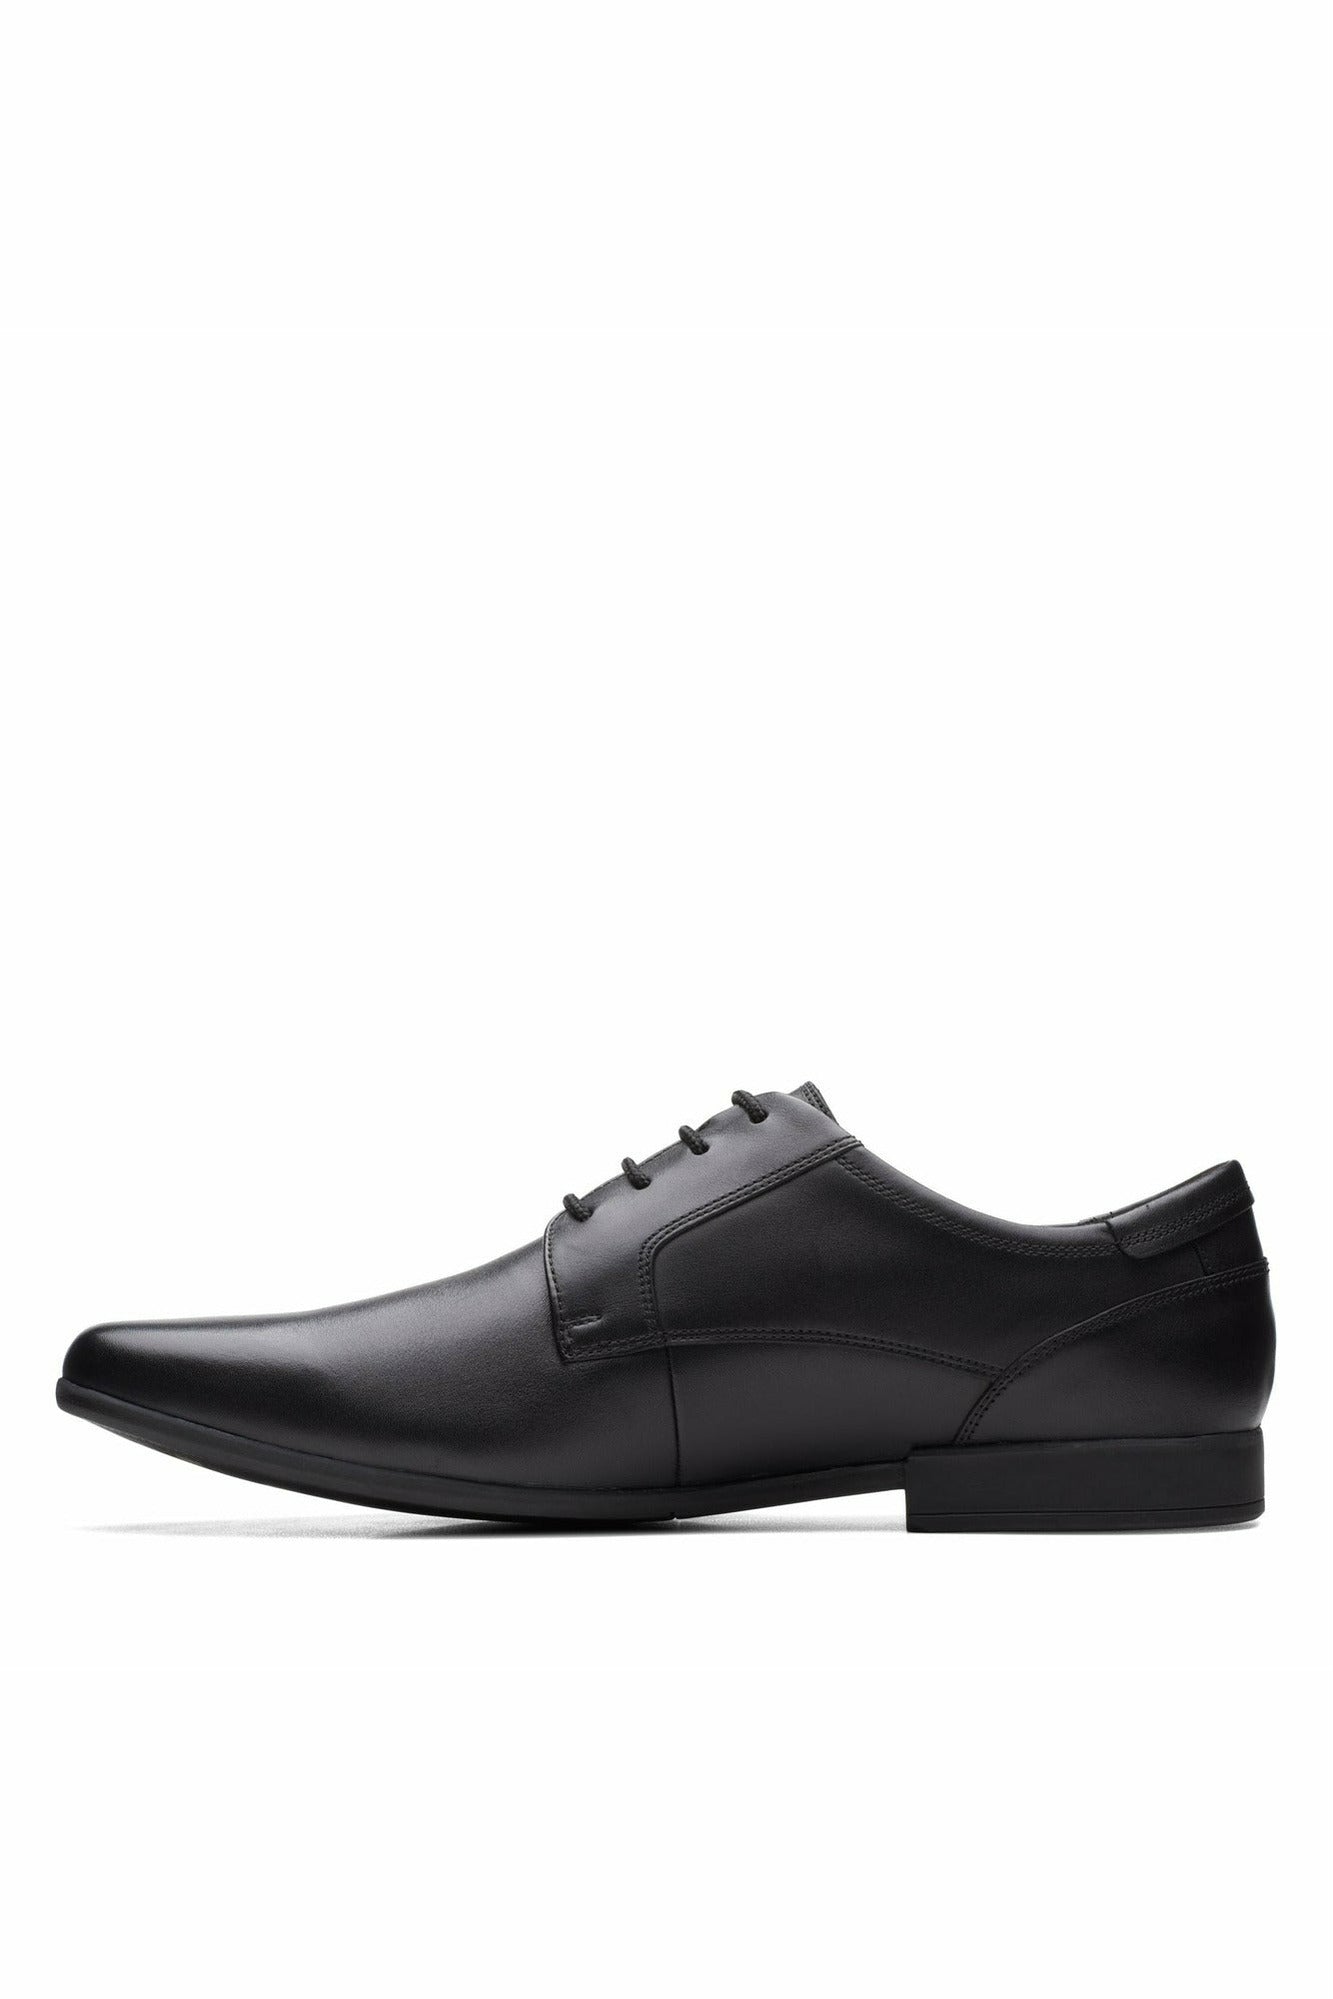 Clarks Mens Sidton Lace in Black Leather